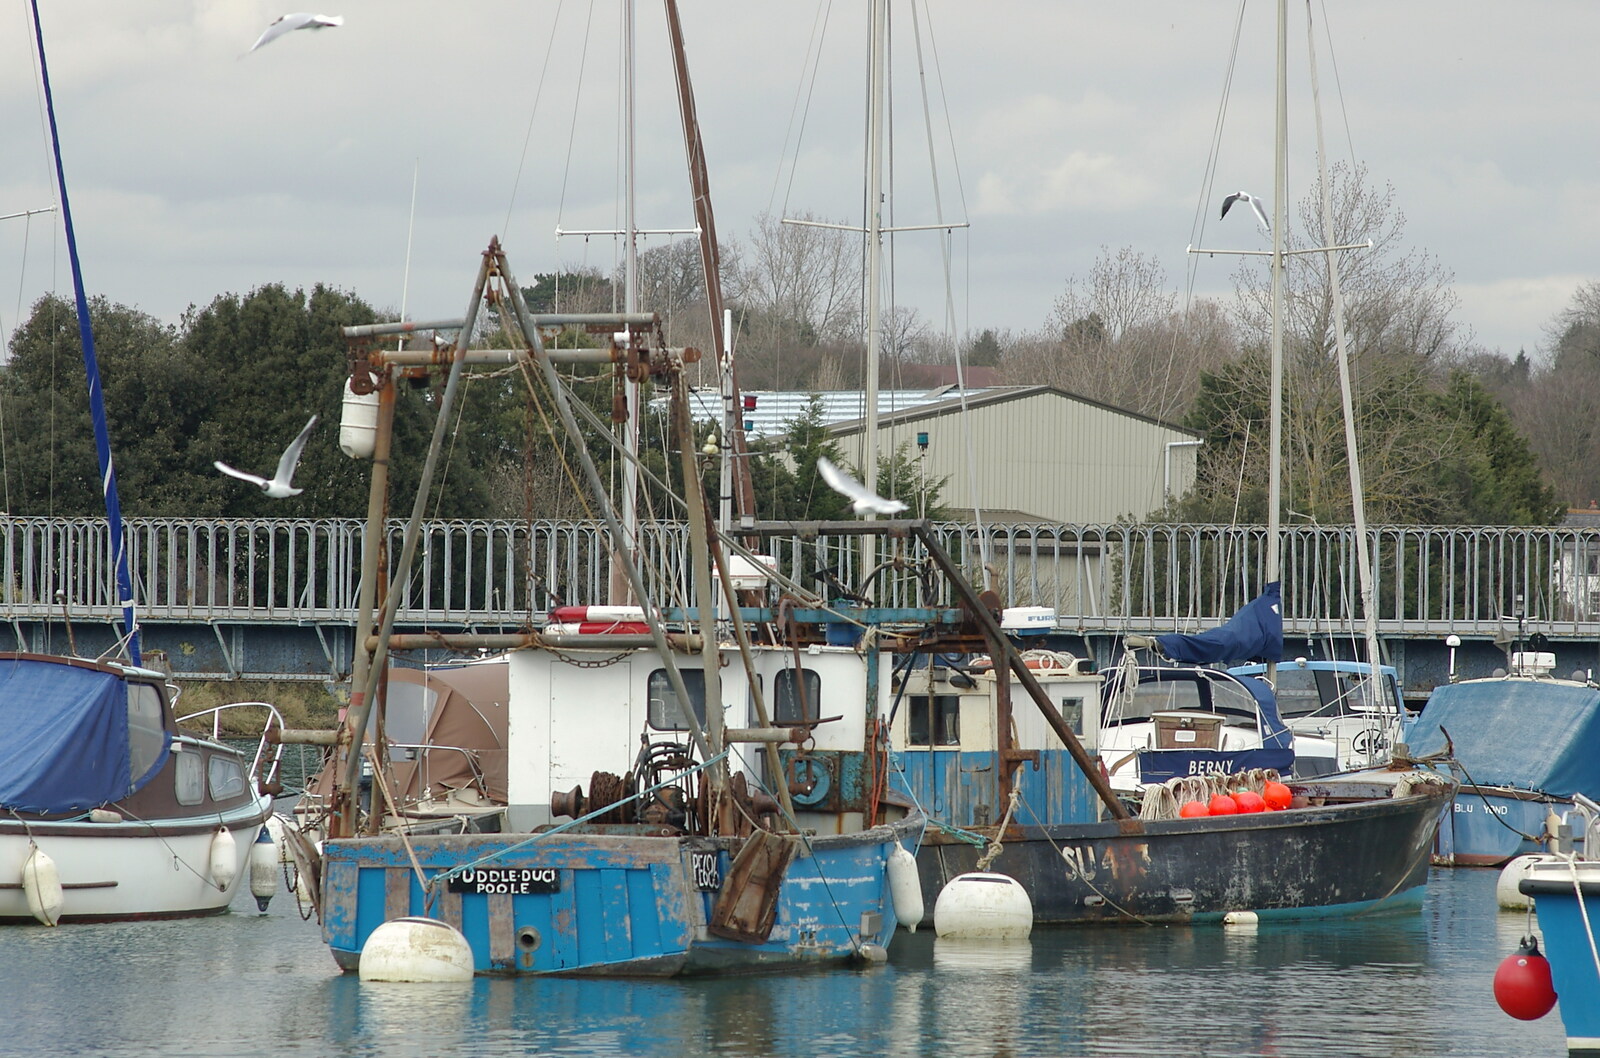 A Walk Around Lymington, and Luke Leaves Qualcomm Cambridge - 13th March 2005: More well-worn fishing boats at Lymington